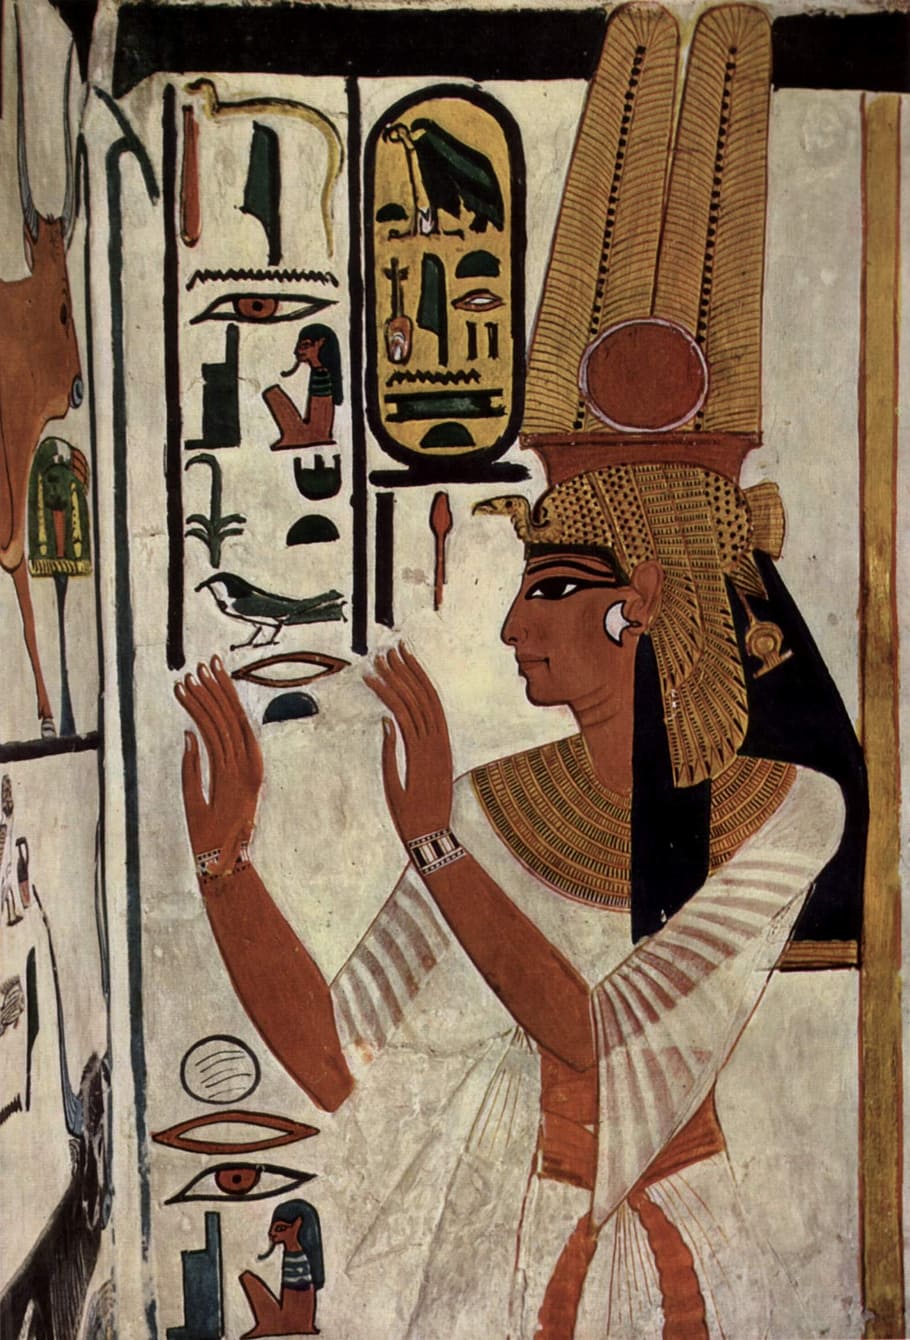 hieroglyphics wall art, hieroglyphics, goddess, queen, pharaonic, pharaohs, grave, valley of the kings, tomb painting, mural